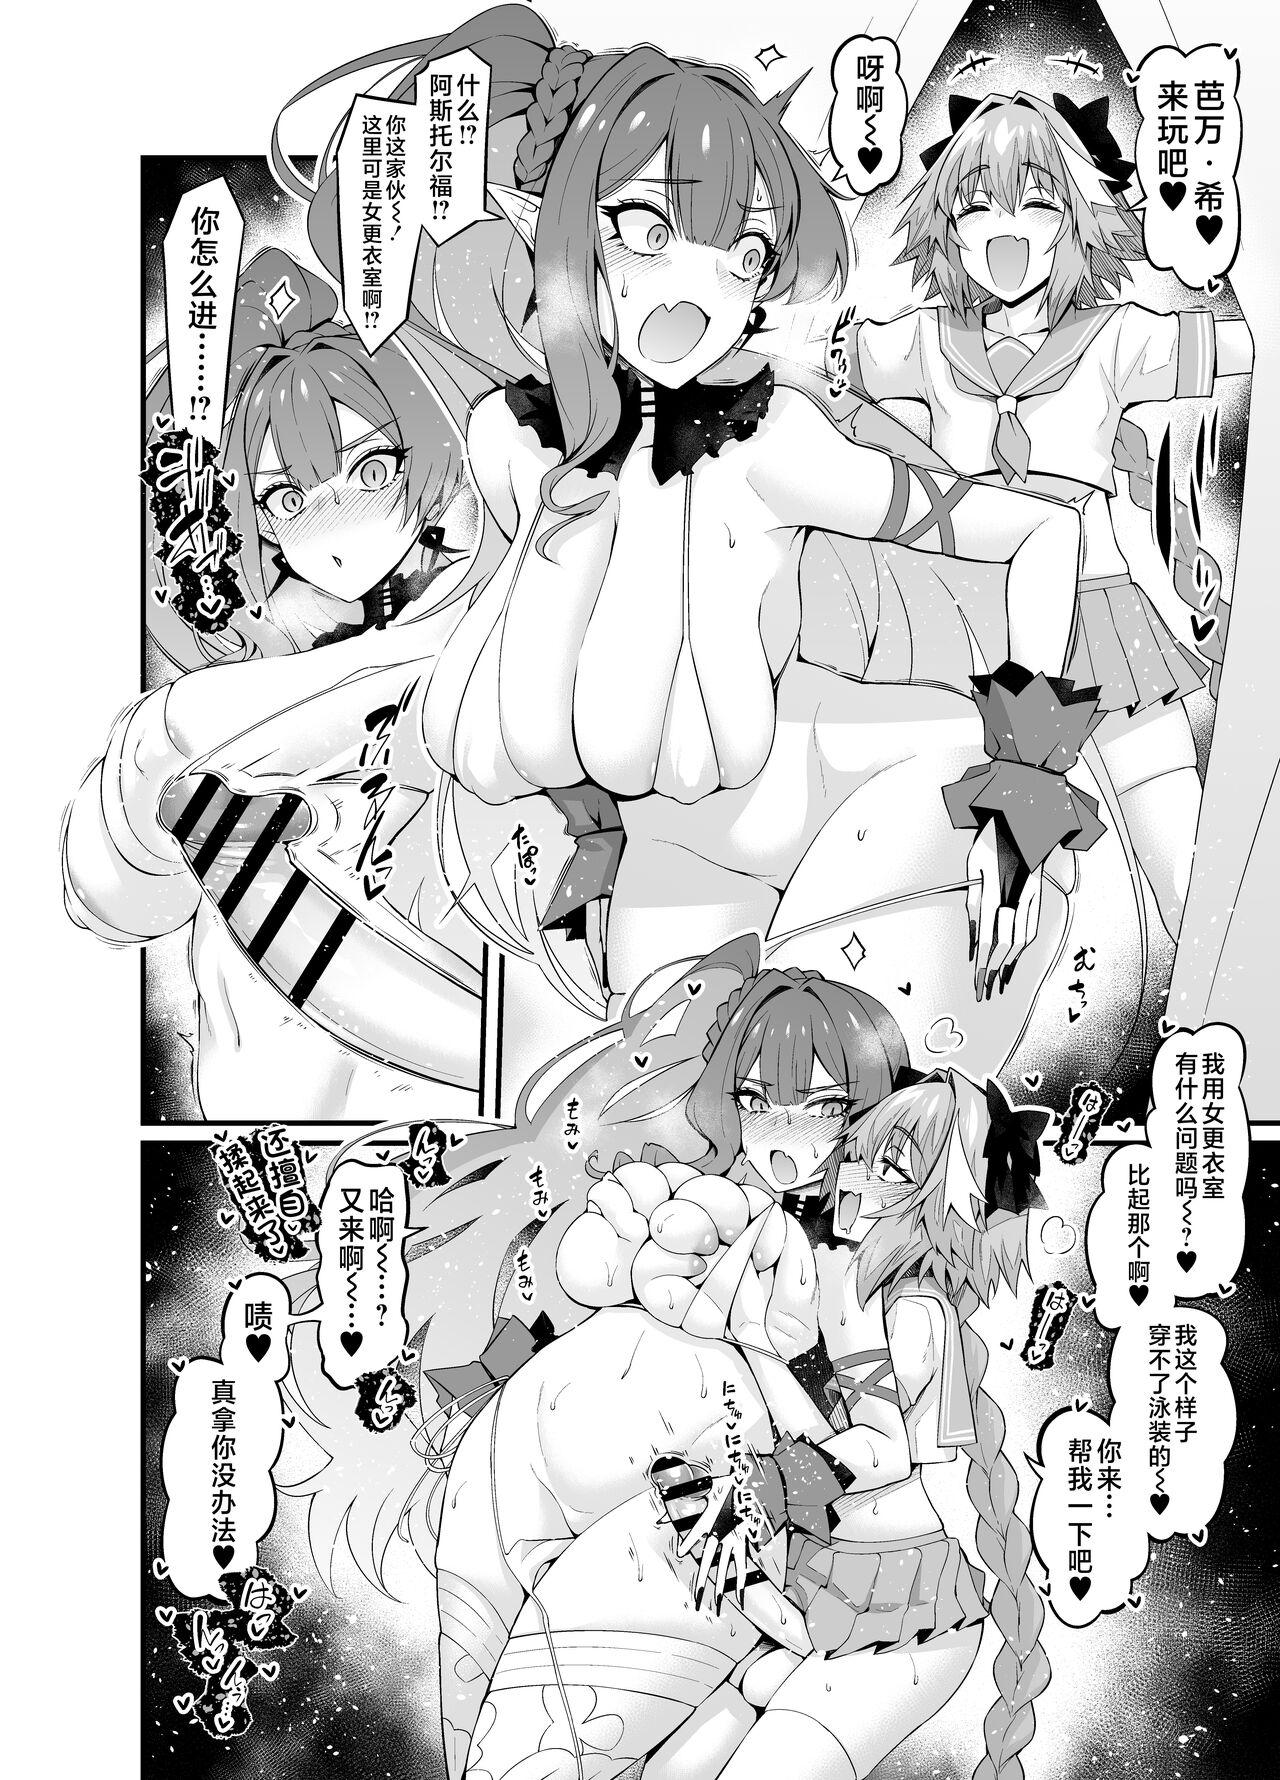 Blow Job Baobhan Sith, Astolfo to Asobu - Fate grand order Ass To Mouth - Picture 2